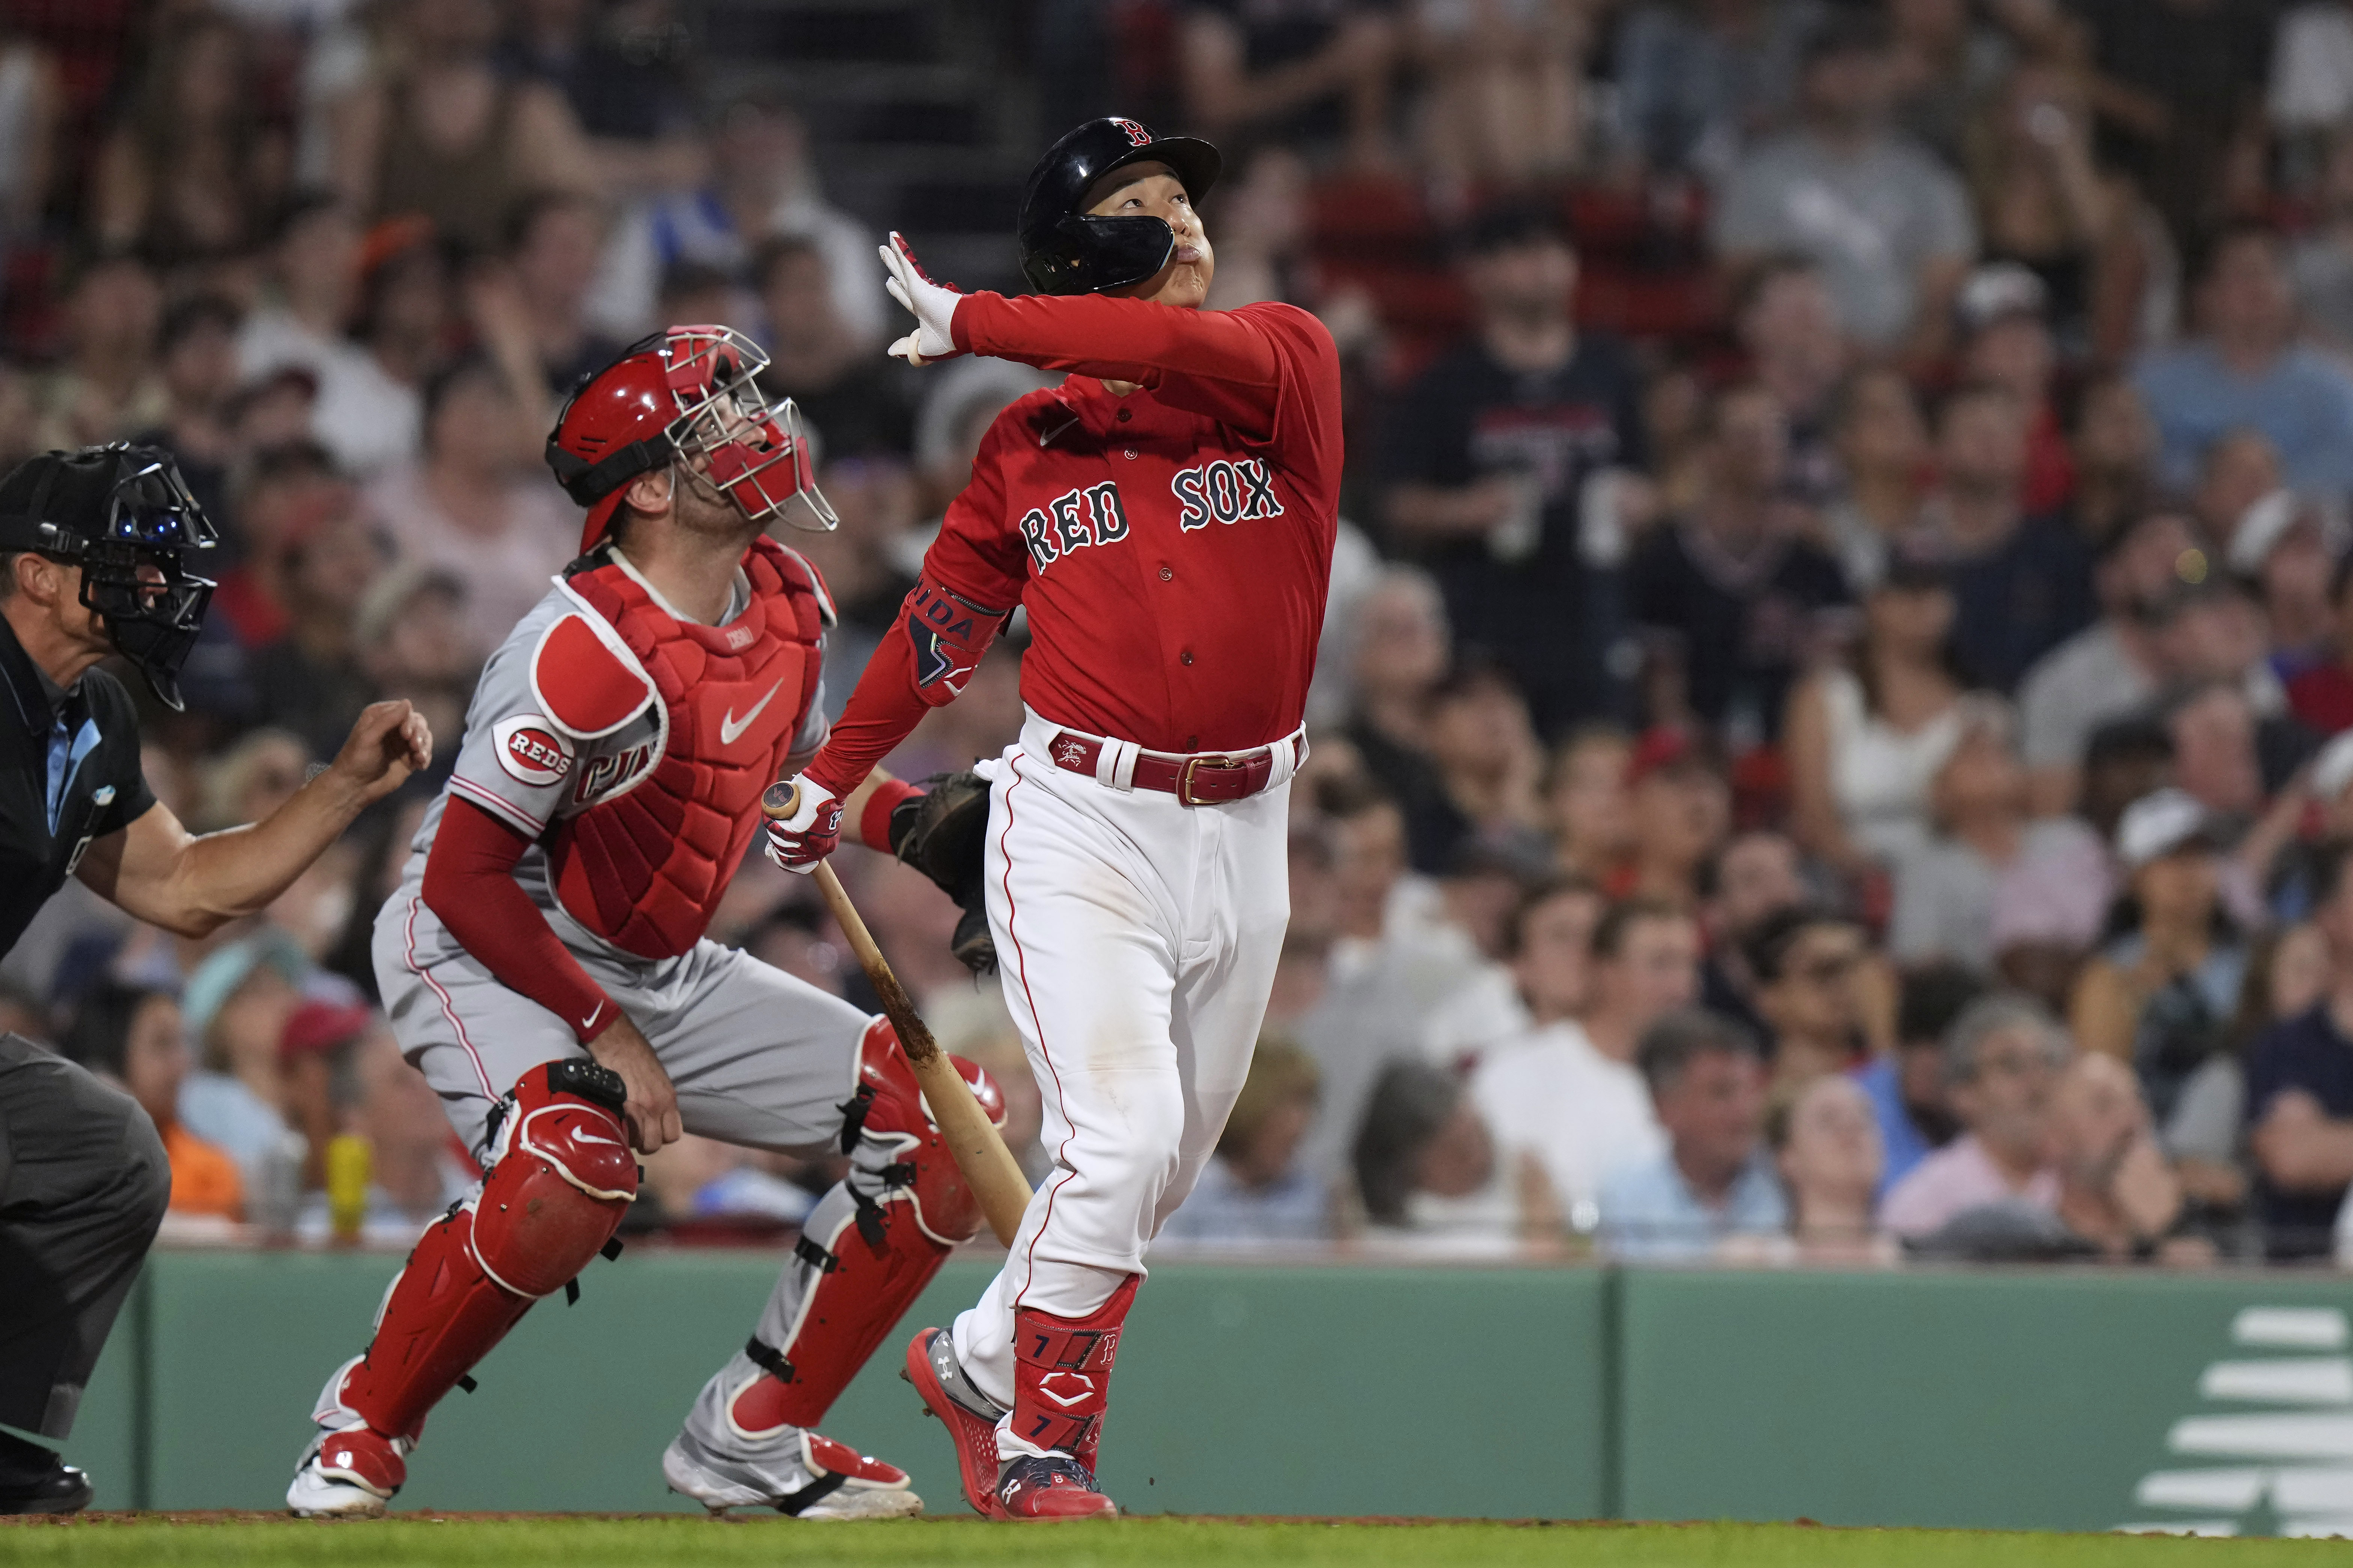 Devers breaks tie in 6-run 8th, Red Sox beat Reds 8-2 to avoid sweep